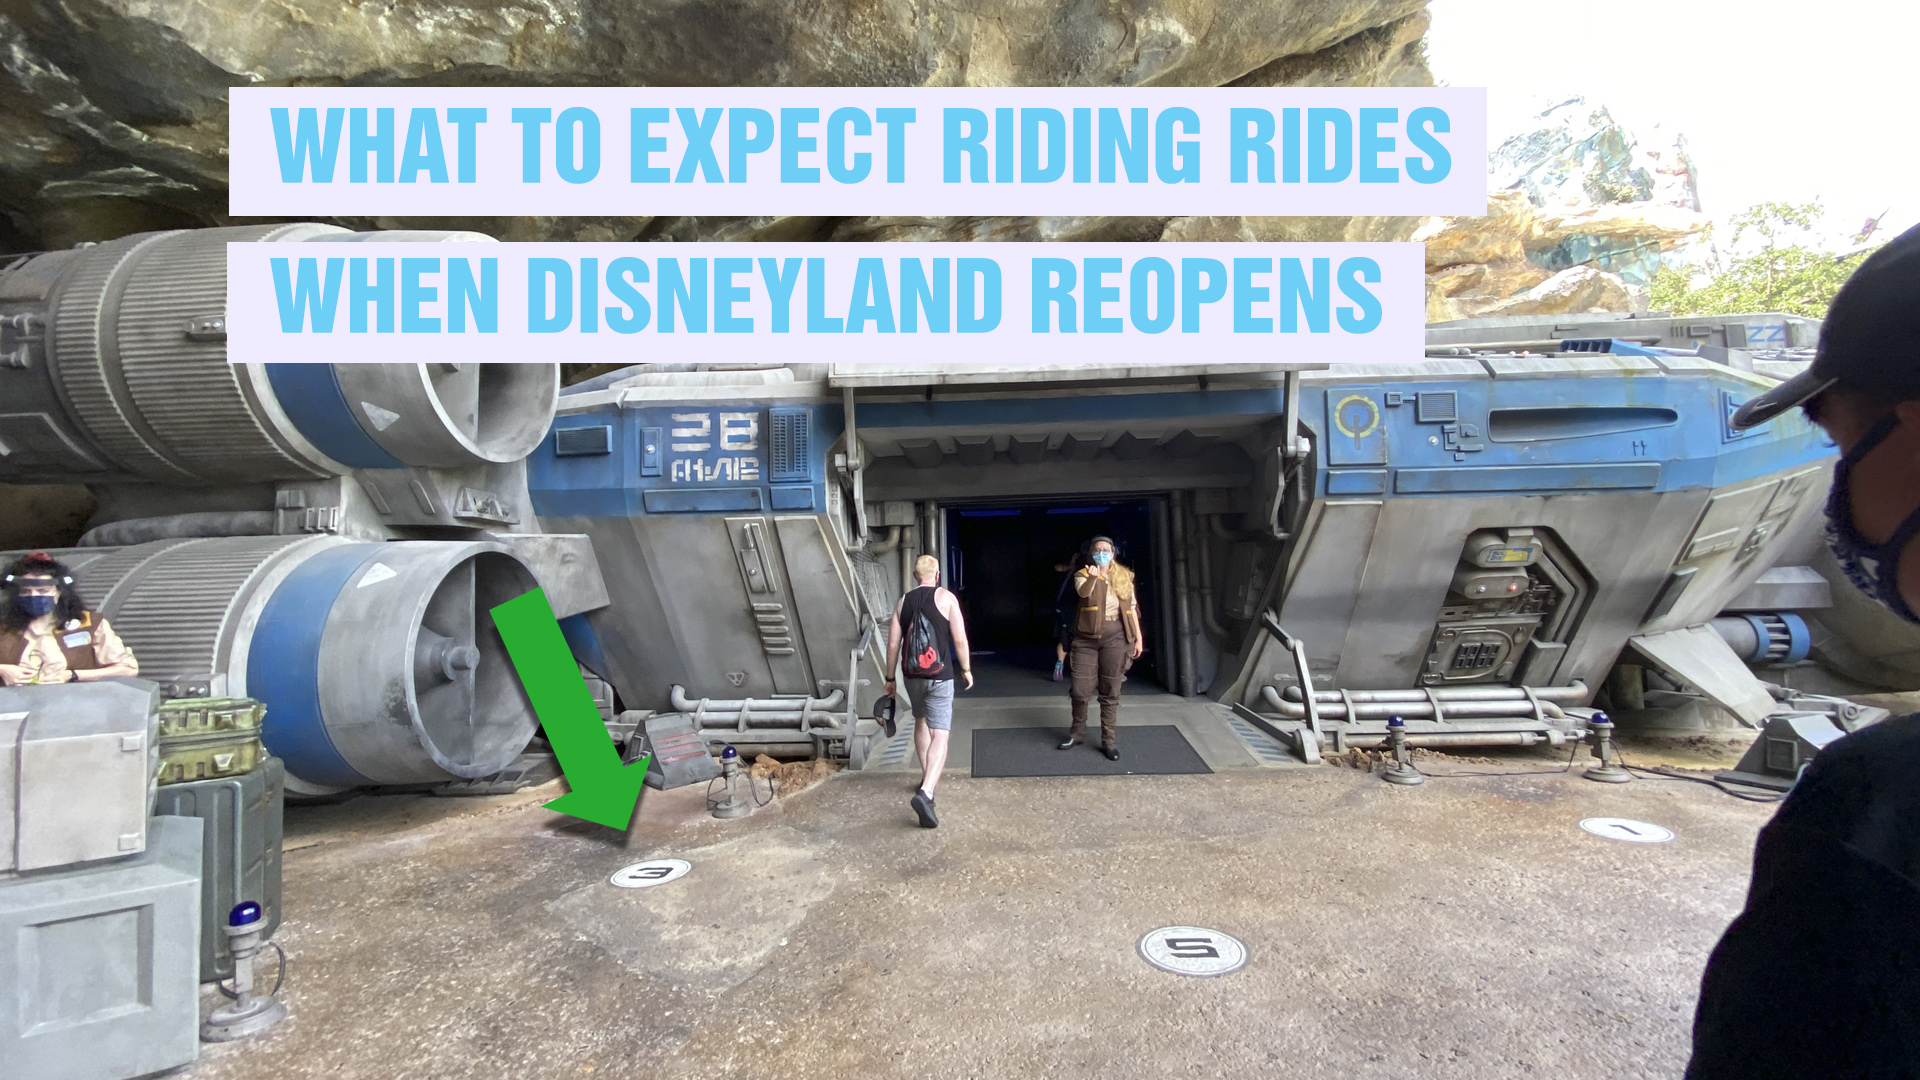 What to Expect With Riding Rides When Disneyland Reopens